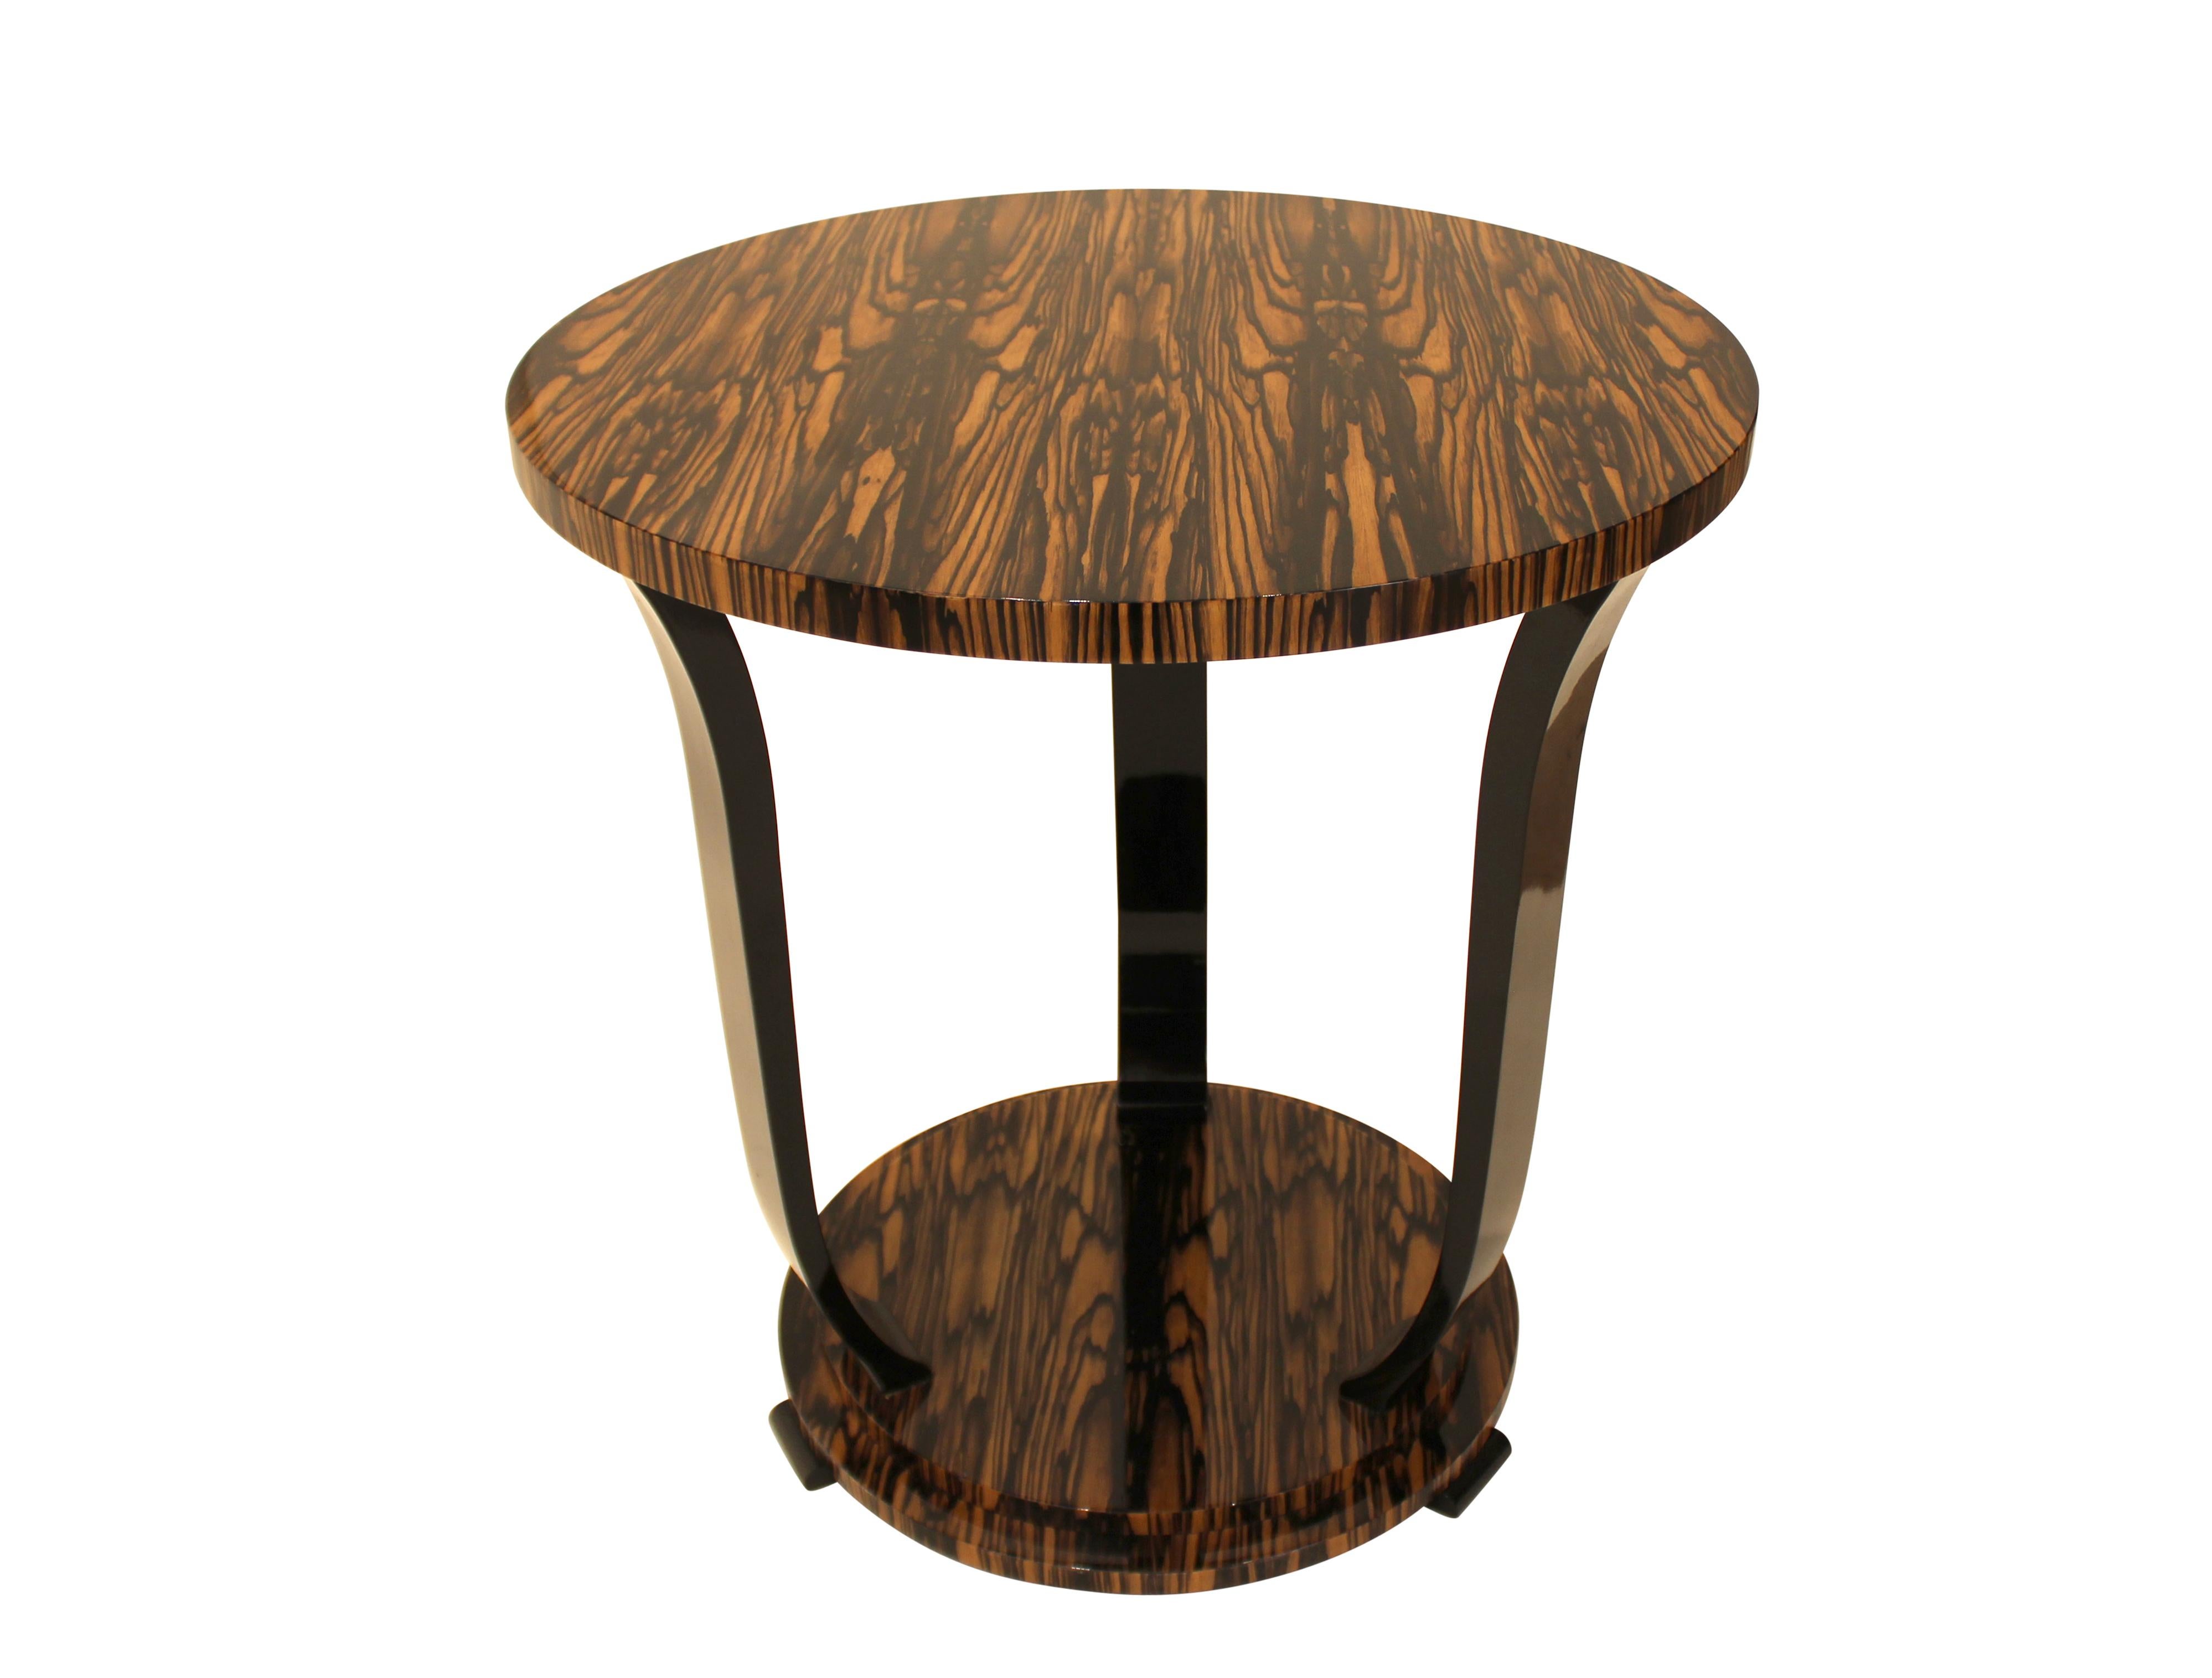 Art Deco inspired side table in stunning White Ebony (or Royal Ebony) veneer and sculptural ebonized legs is fully customizable with various veneers available; size adjustments can be included in customization process. Minimalistic shape of the